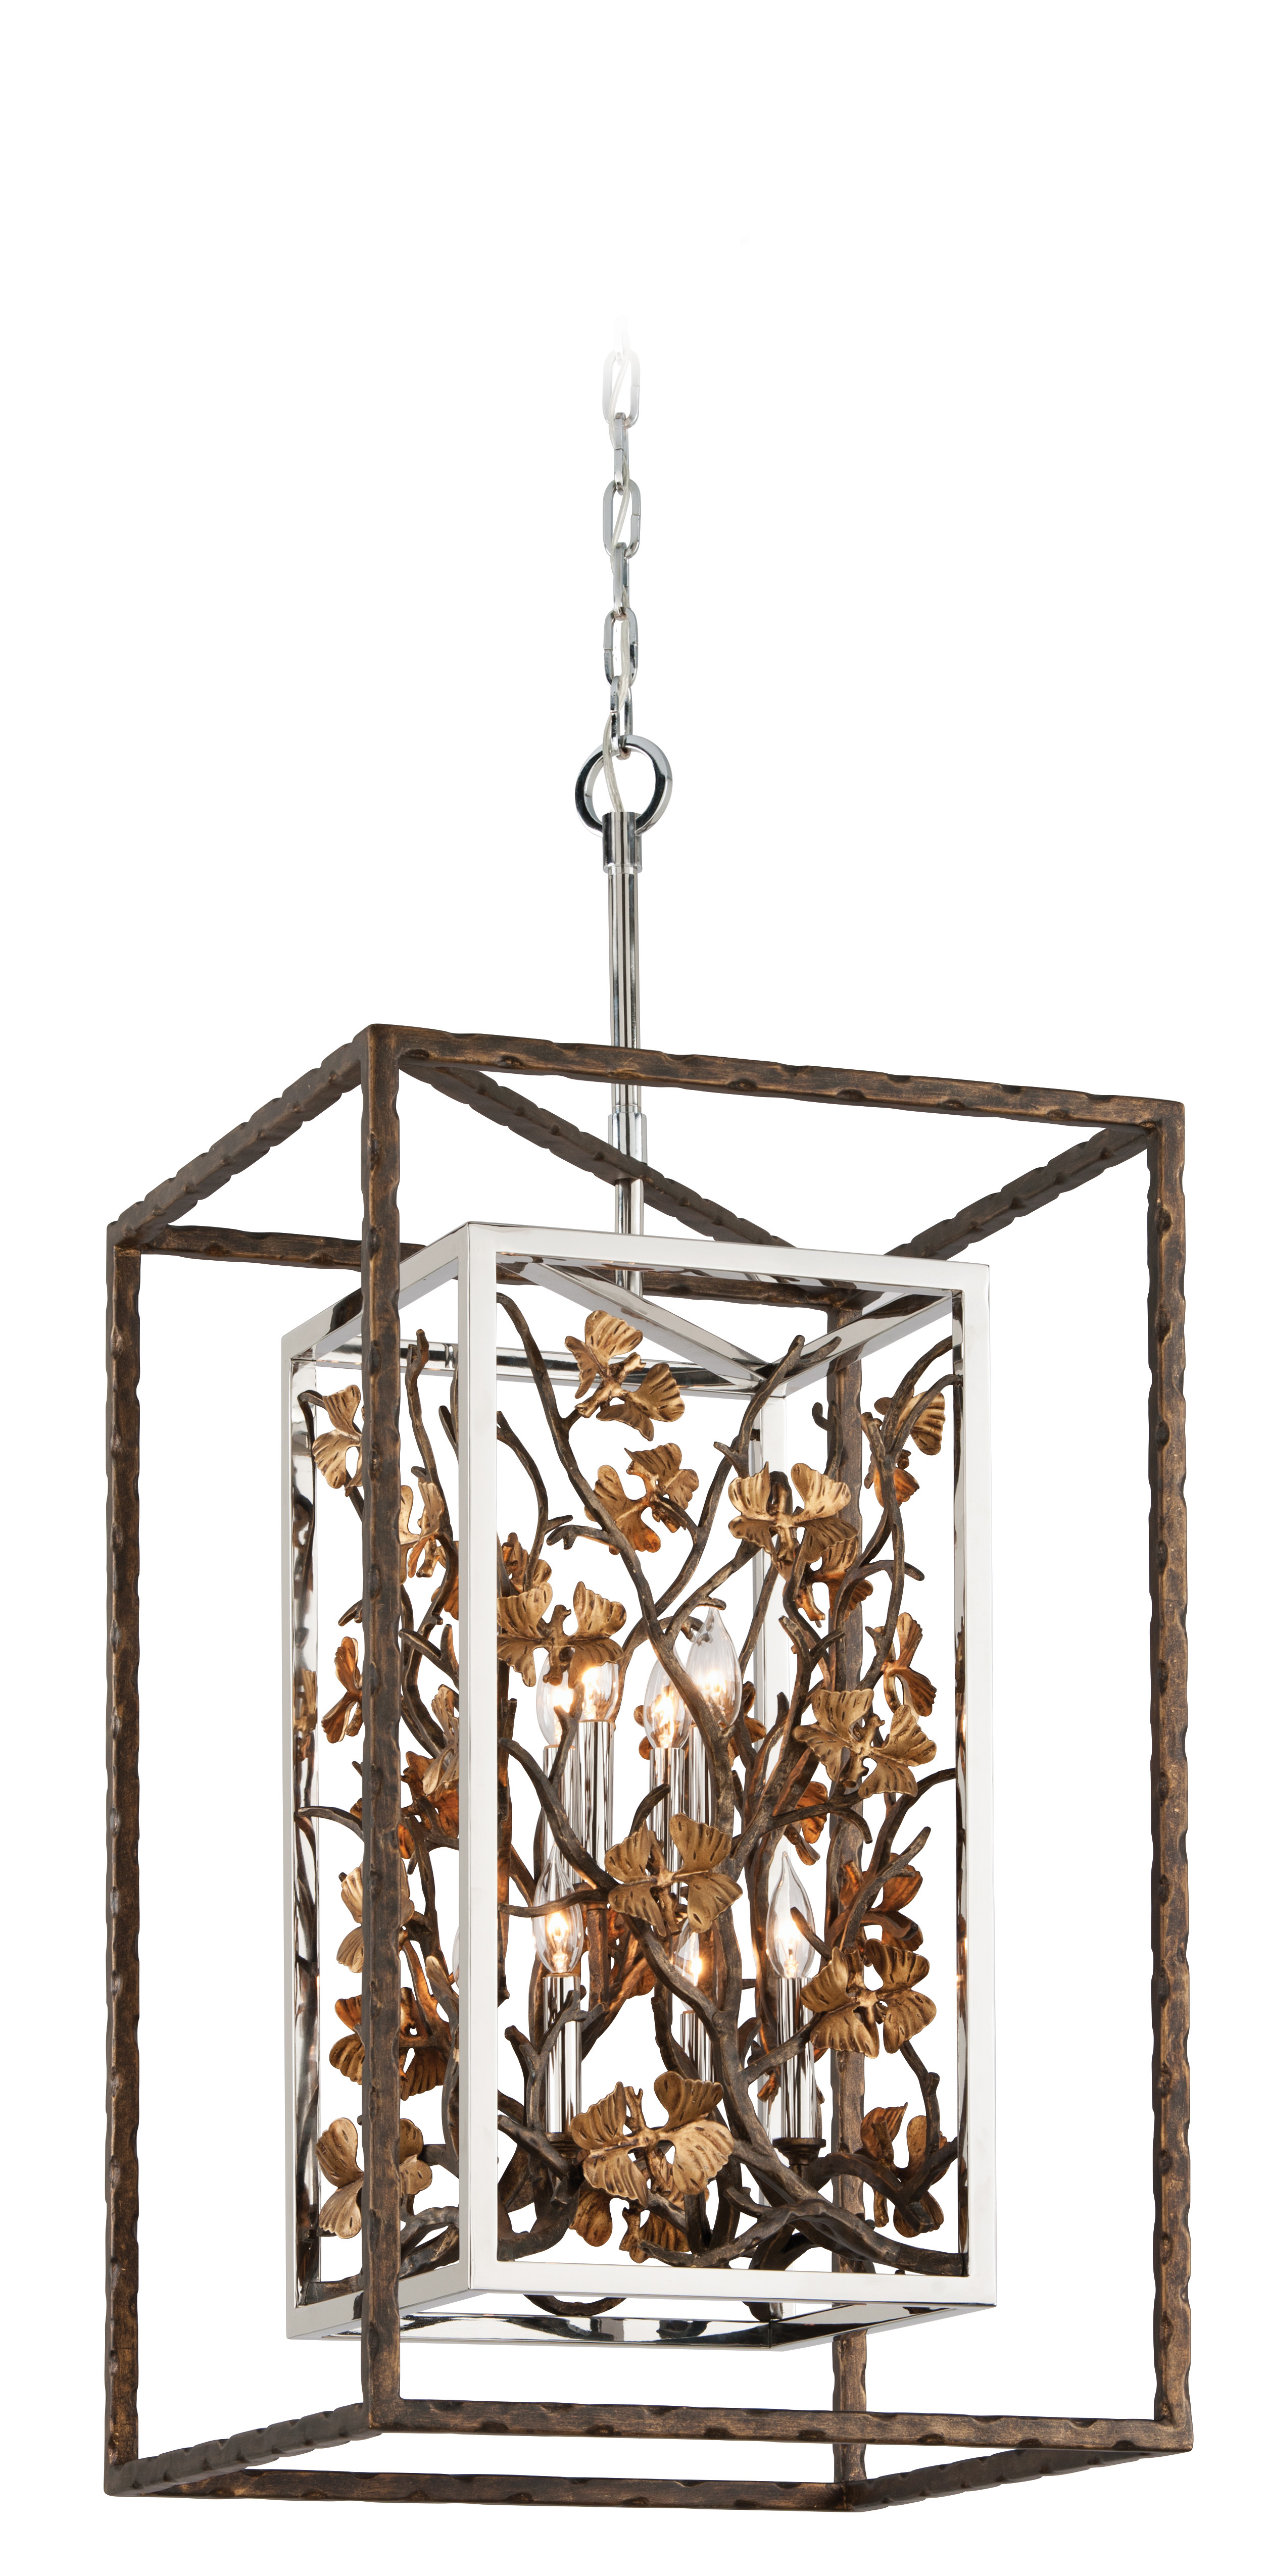 Chrysalis by Troy Lighting - Chrysalis is a handcrafted, sculptural pendant adorned with a beautiful arrangement of branchwork and gold leaf butterflies.